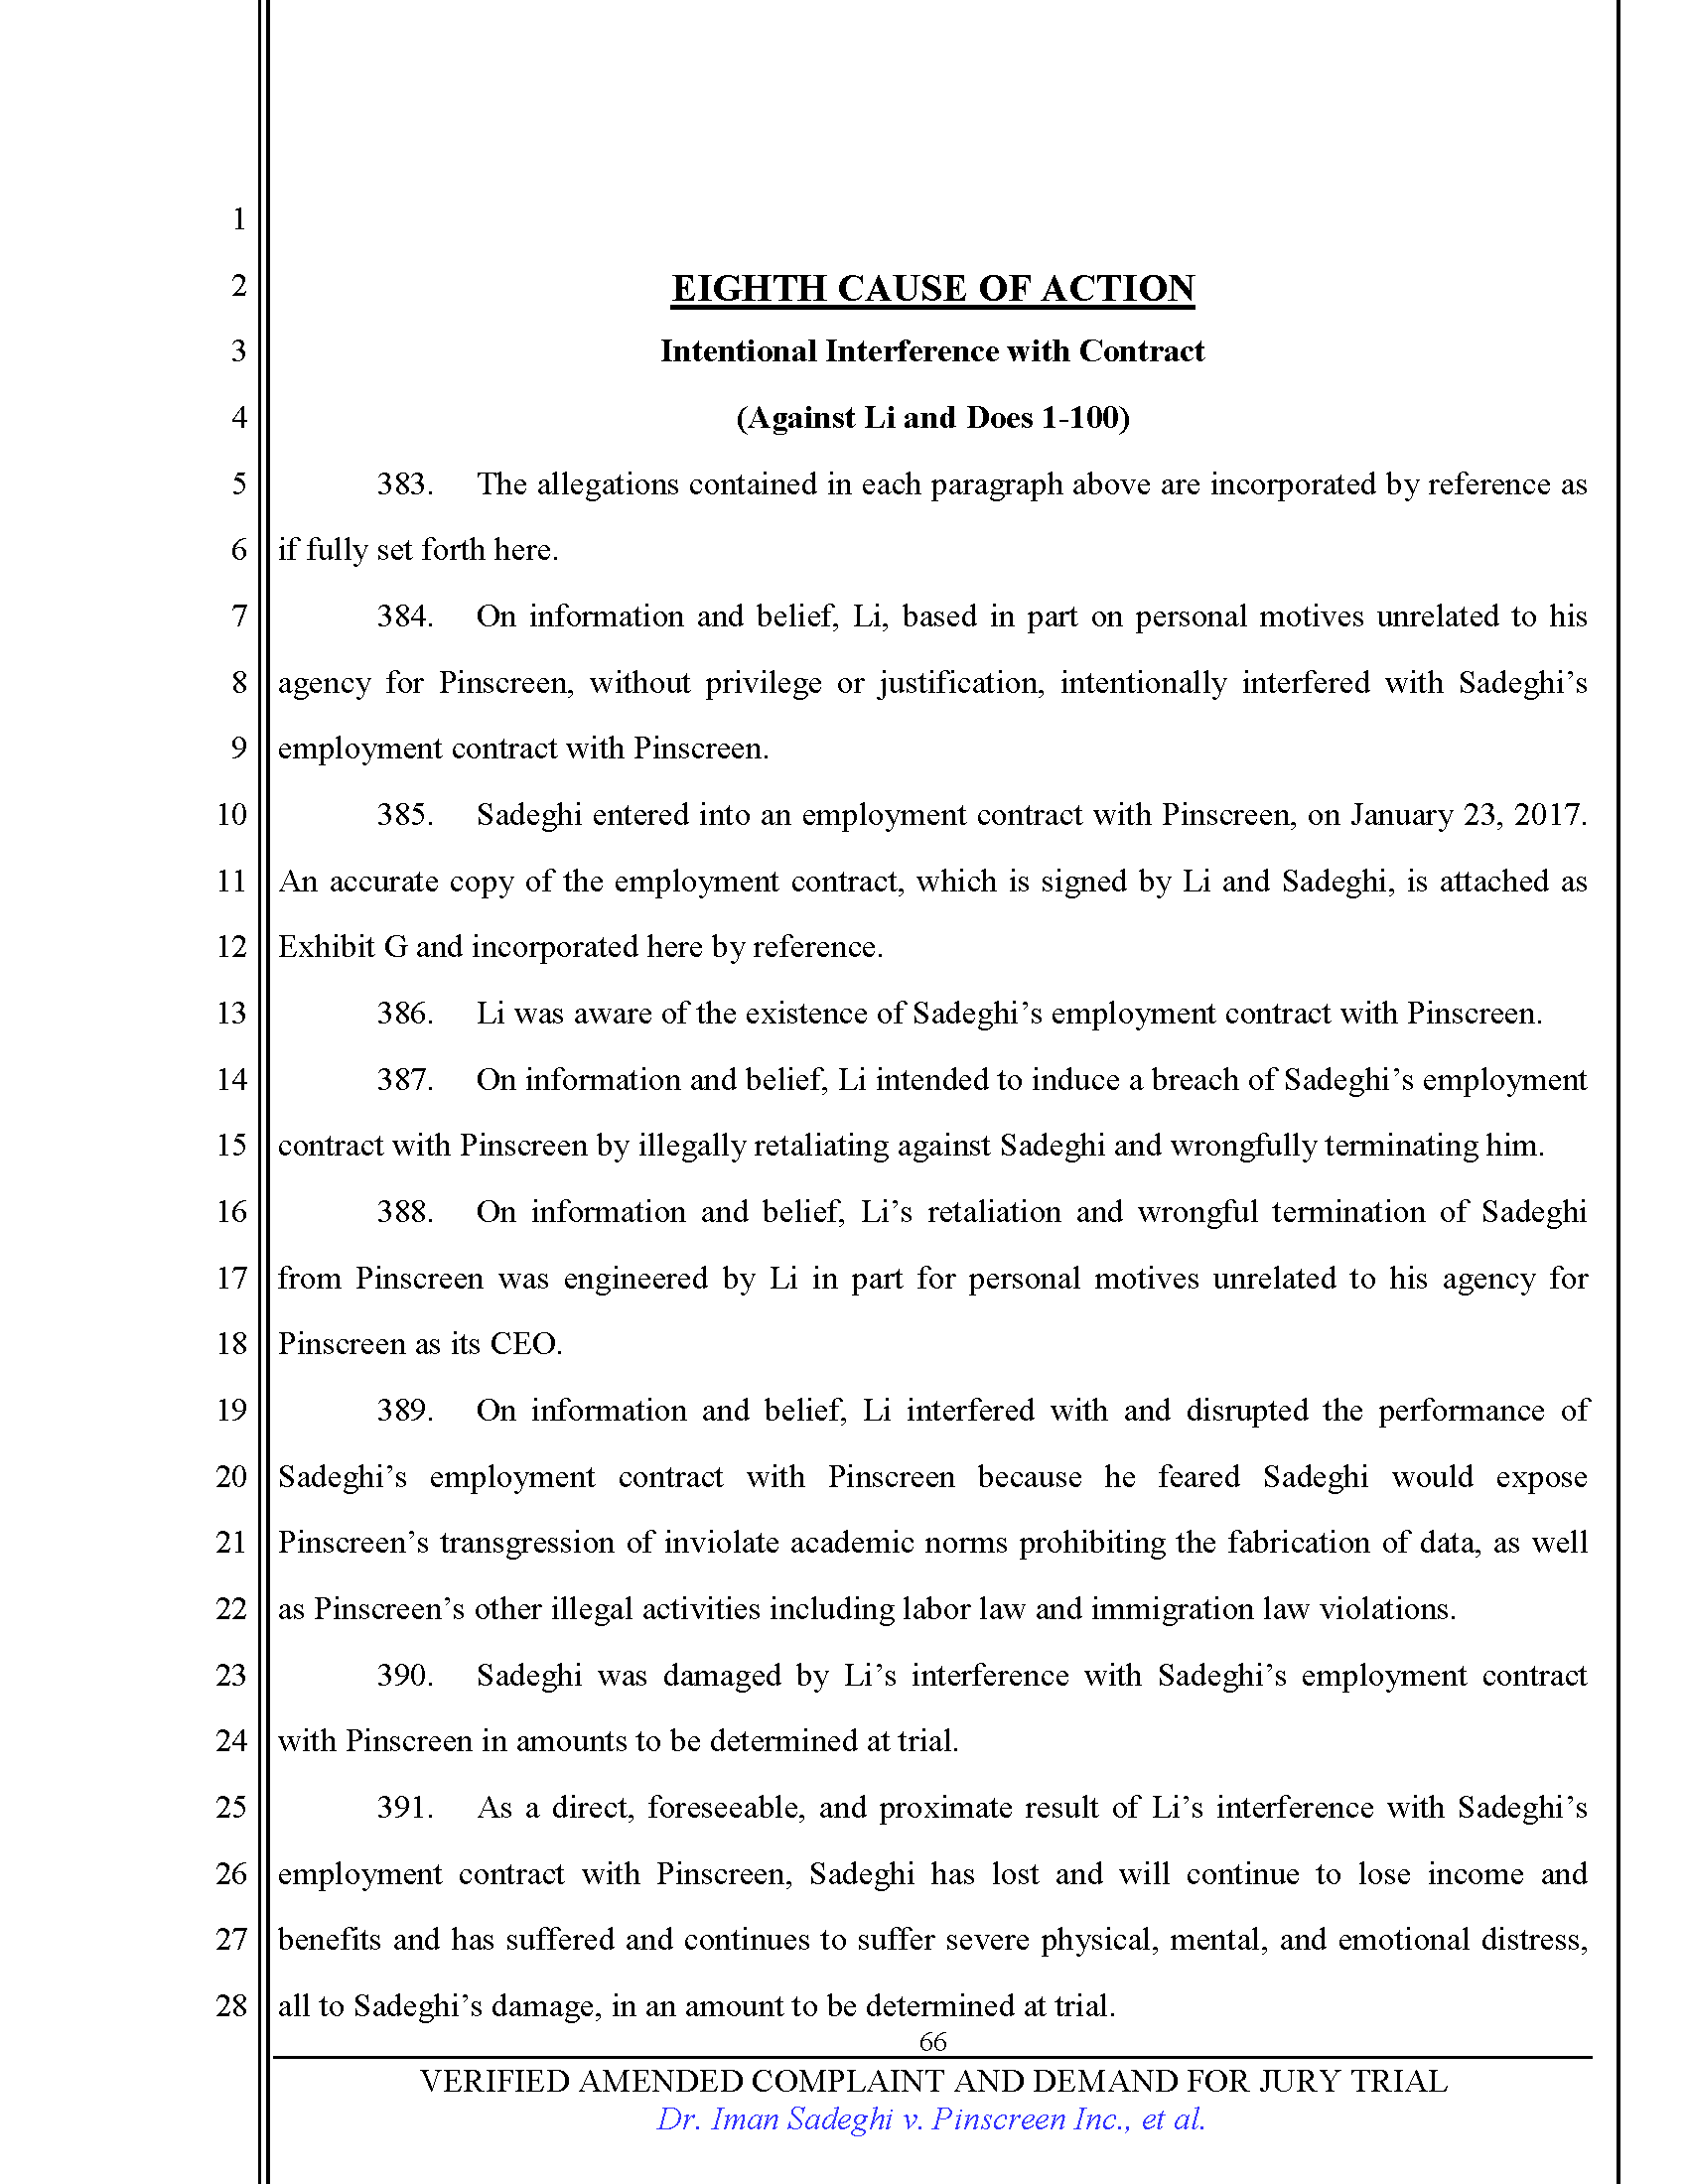 First Amended Complaint (FAC) Page 66